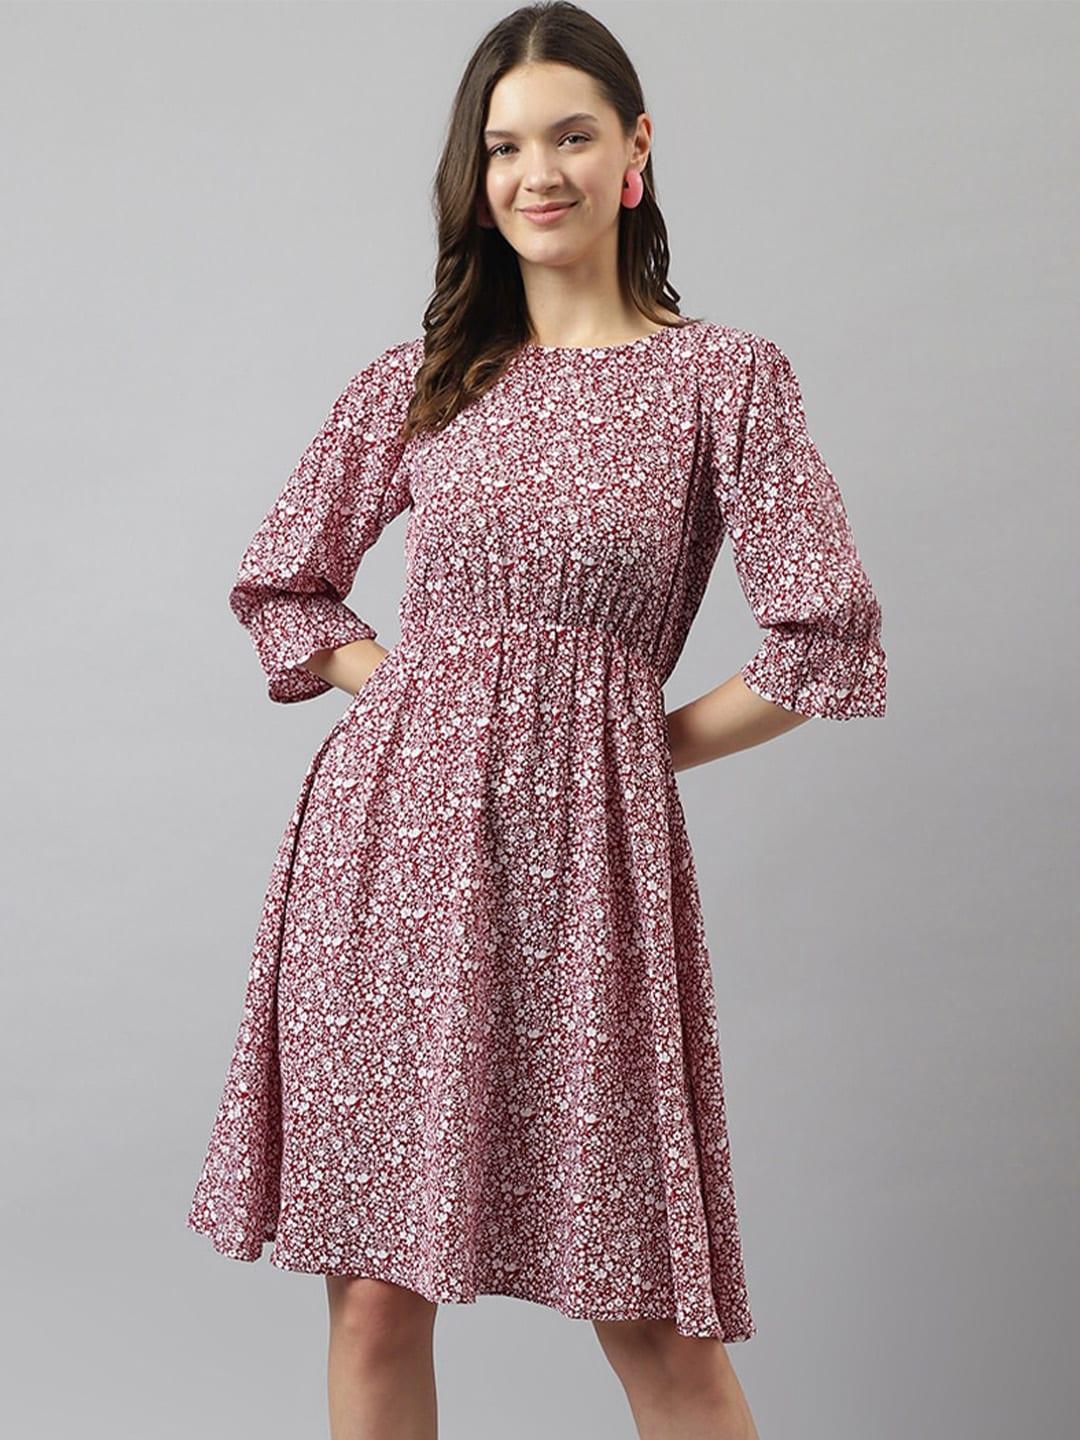 BAESD Maroon Floral Print Puff Sleeve Fit & Flare Dress